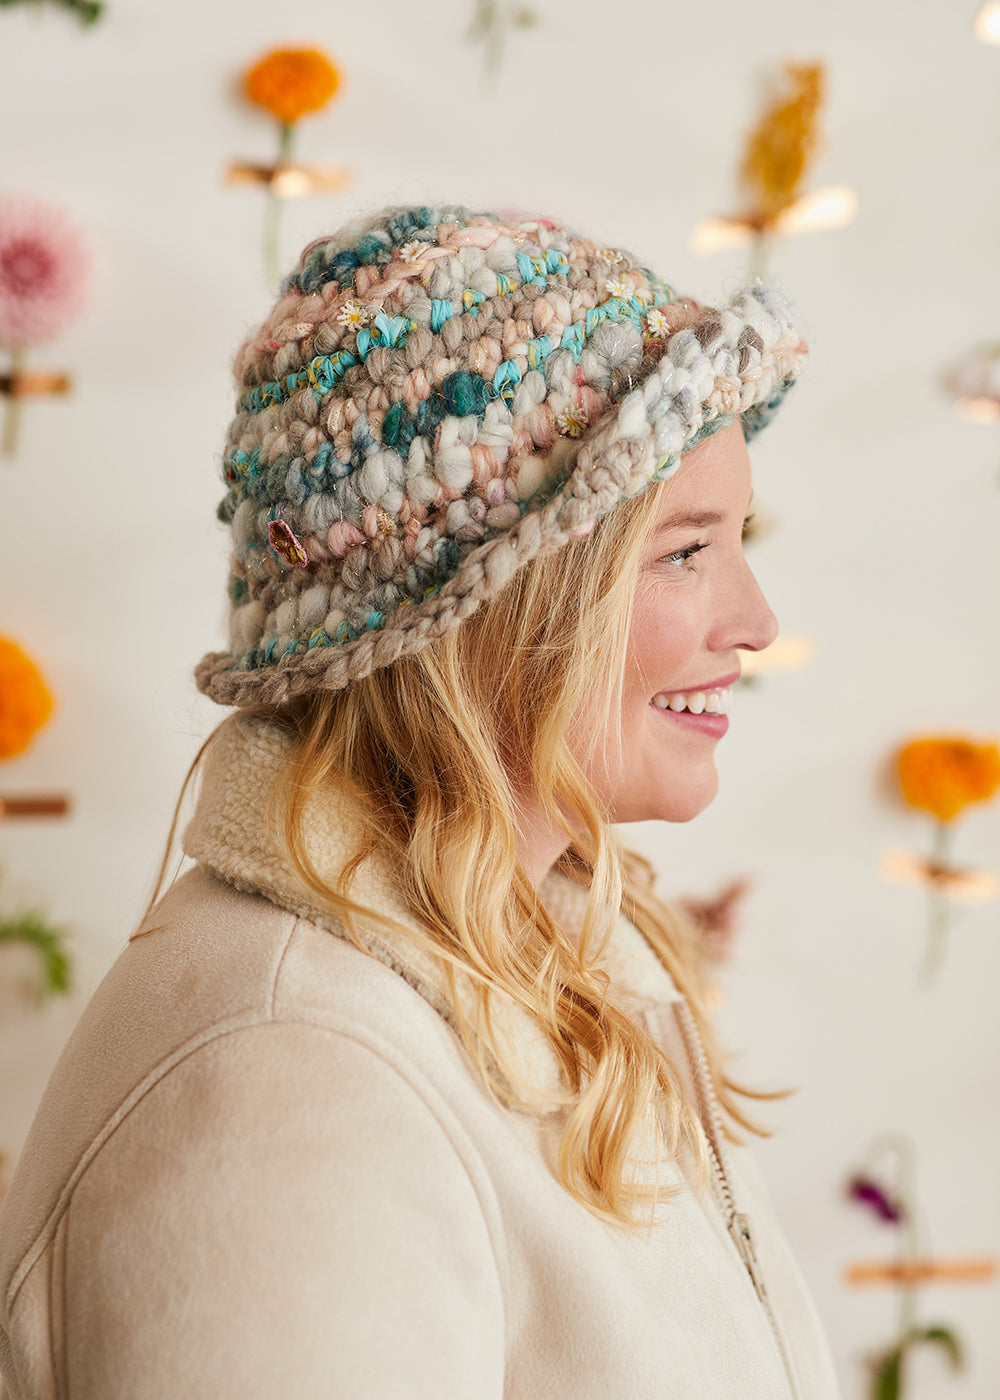 Crochet bucket hat in different colors being modeled by a woman.